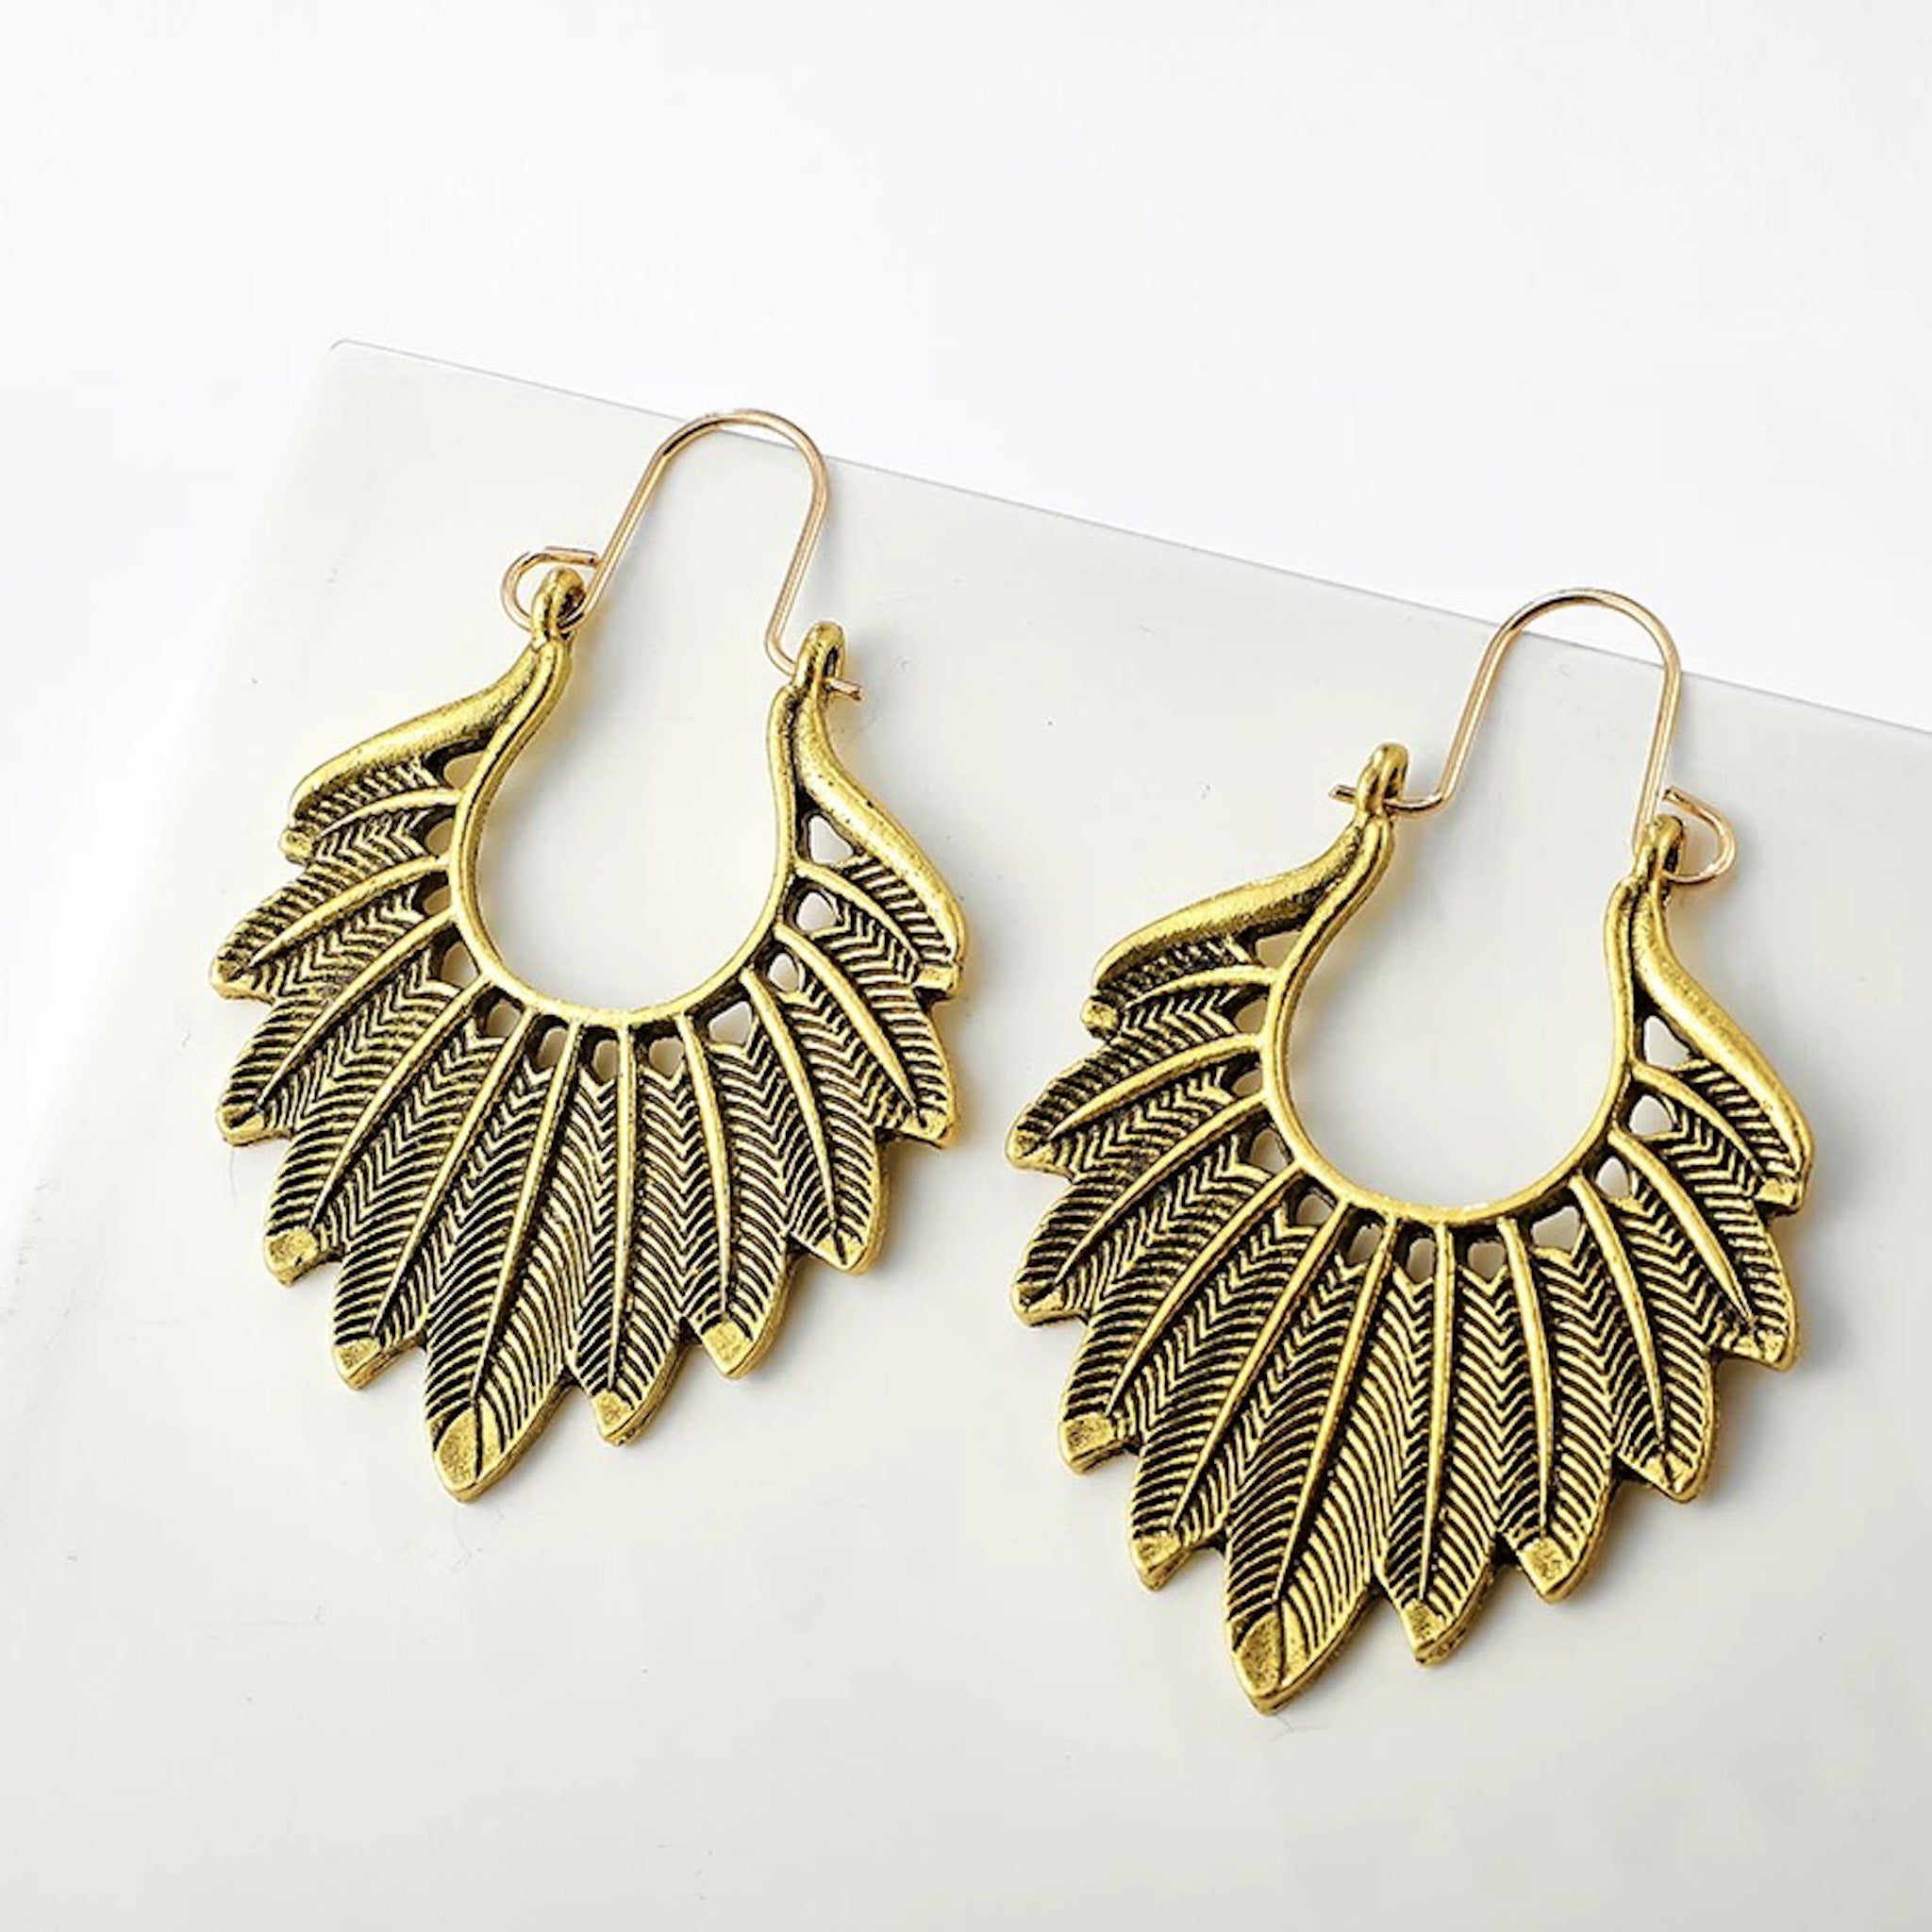 BNWT Antique Gold Bohemian Etched Feather Hoop Earrings